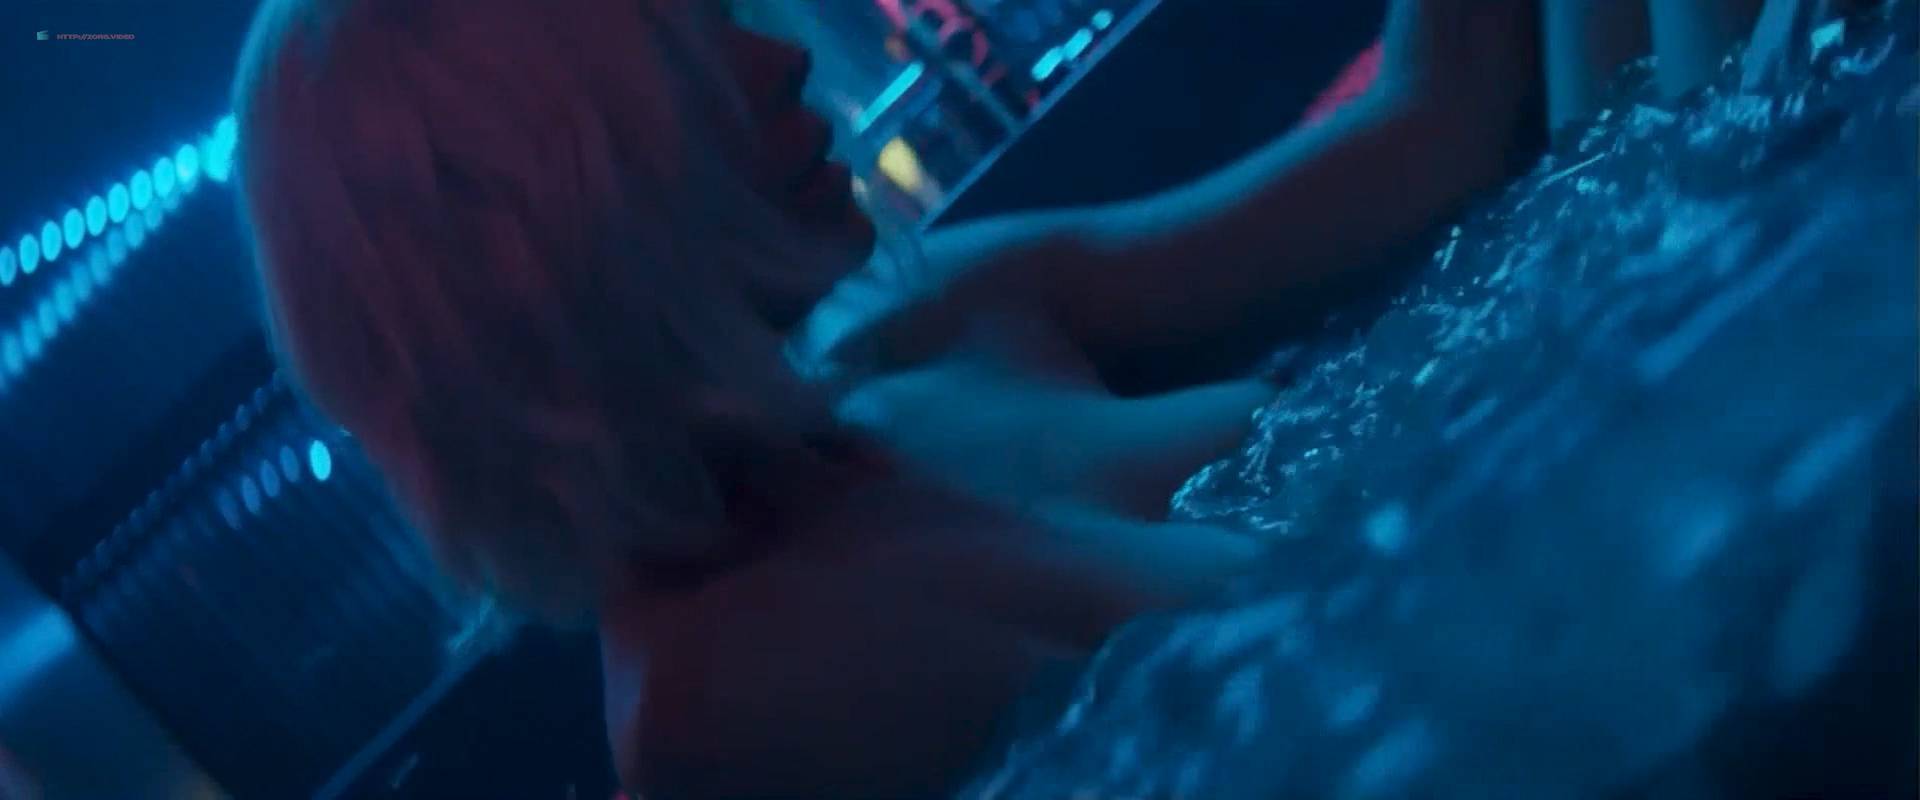 Naked Charlize Theron In Atomic Blonde